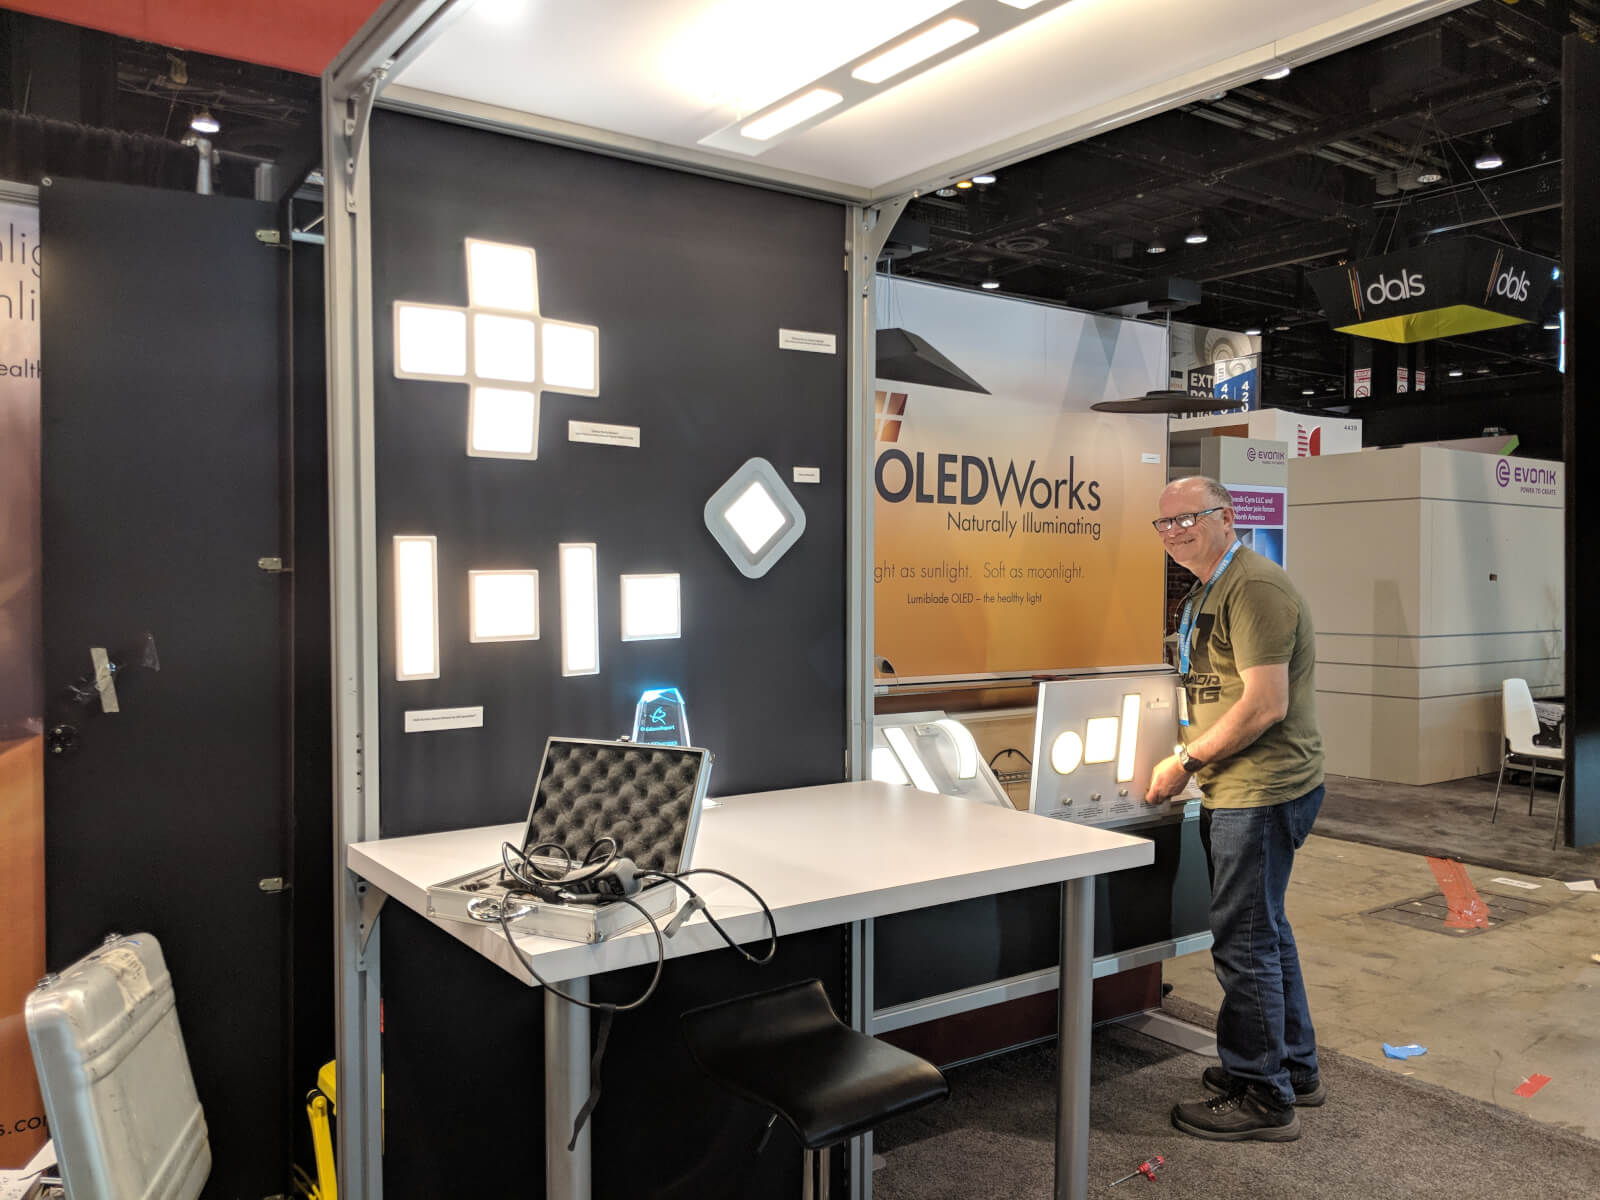 Prototype Manager Jeff Jackson at OLEDWorks booth at Lightfair 2018